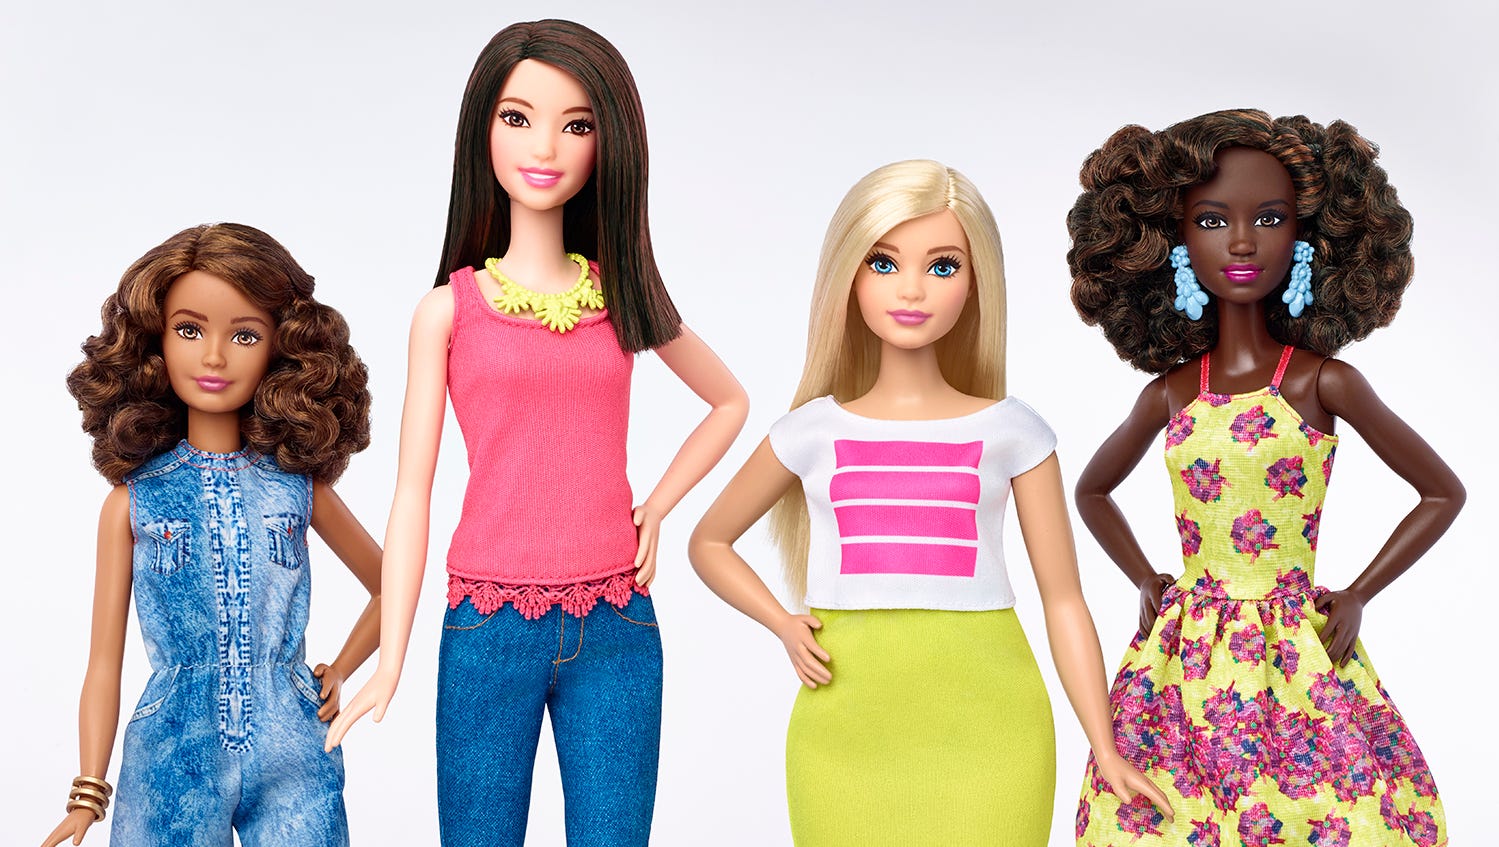 New Barbie reflects more realistic bodies: Your Say